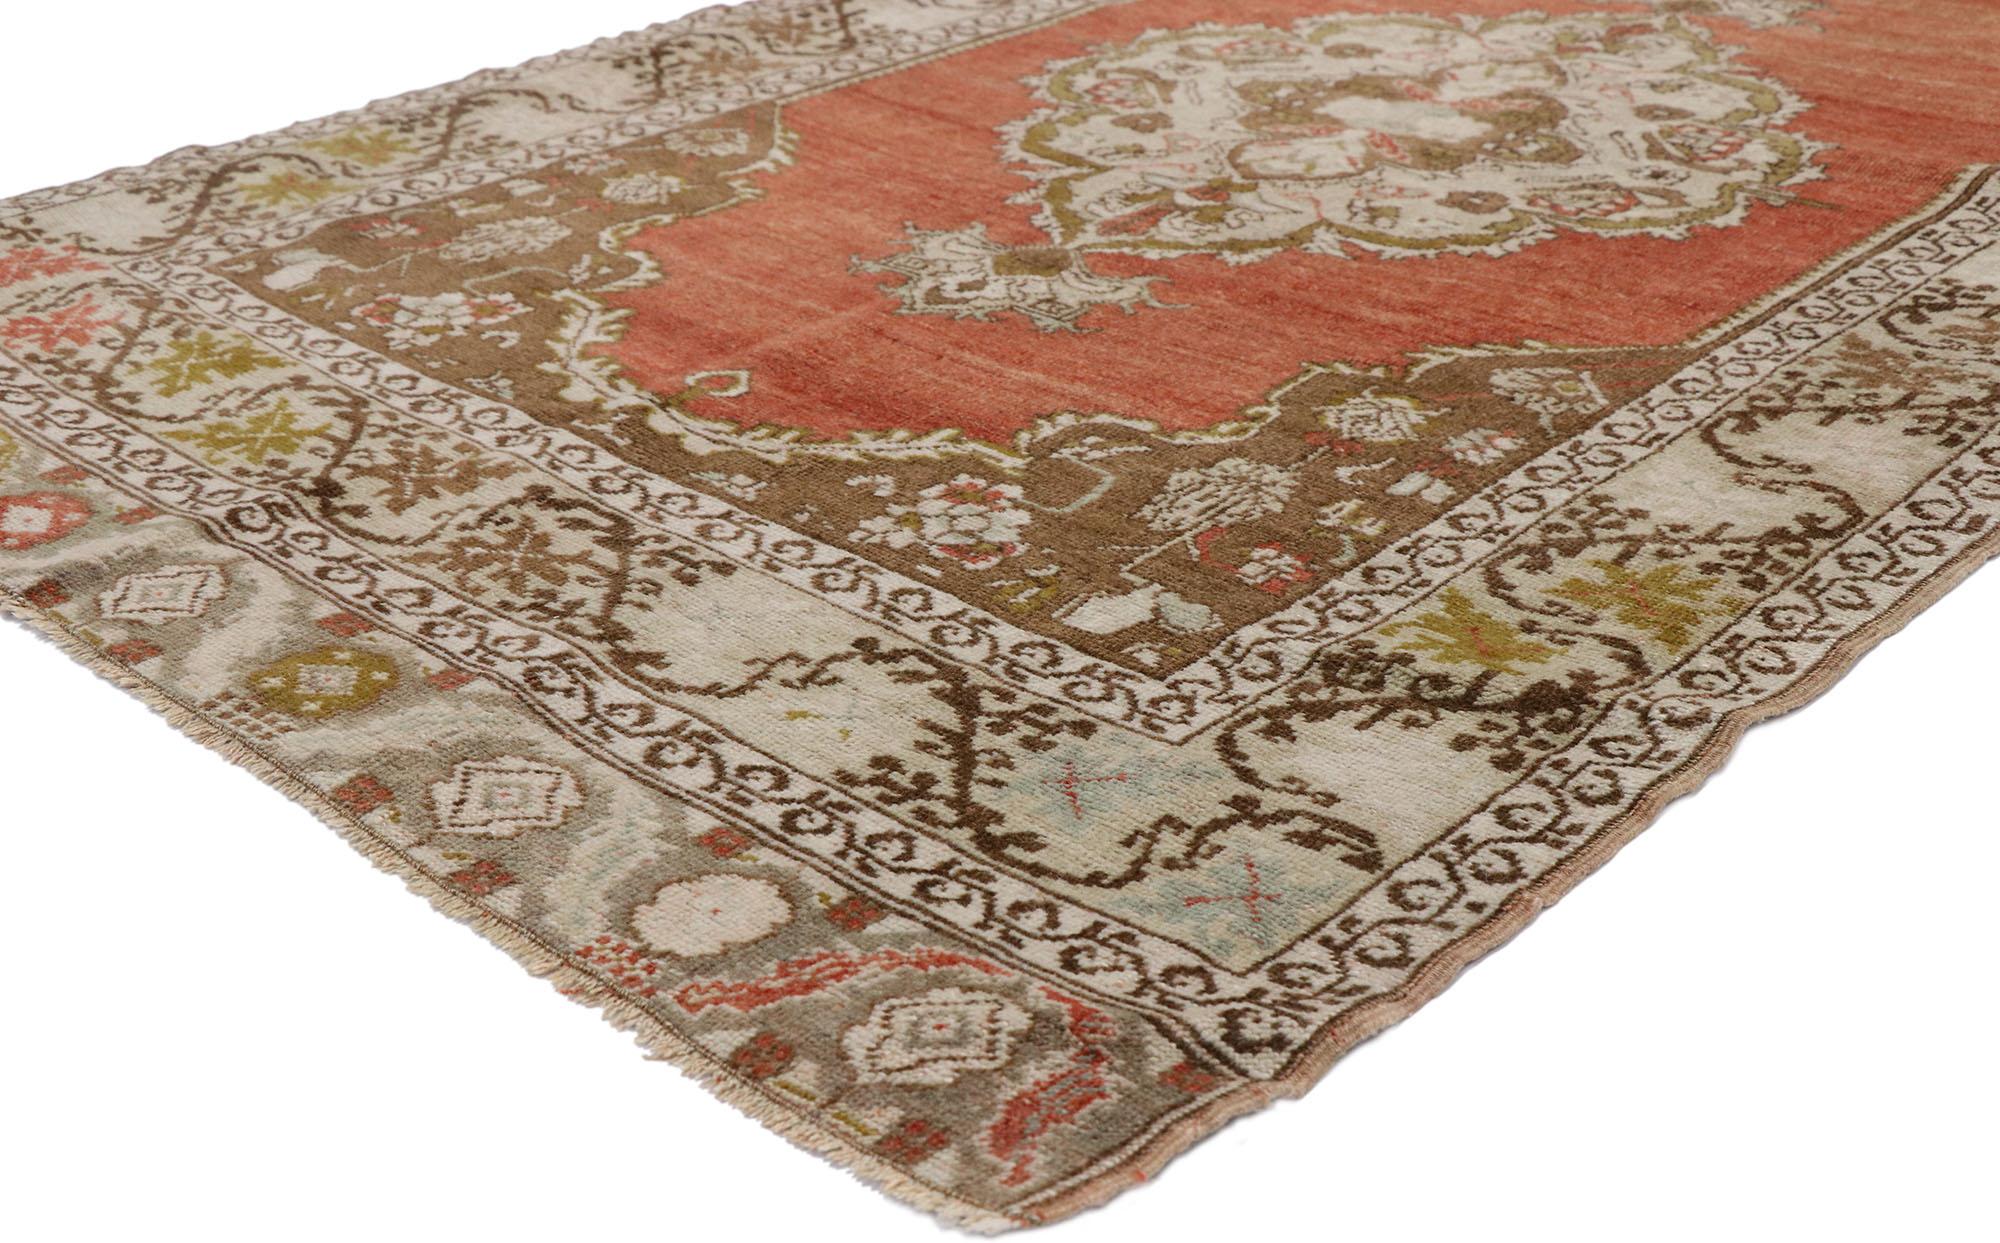 52741 Vintage Turkish Oushak Runner with Manor House Tudor Style. Romantic Rusticity meets timeless Tudor style in this hand knotted wool vintage Turkish Oushak runner. Three large scale medallions patterned with serrated tear drops and leafy